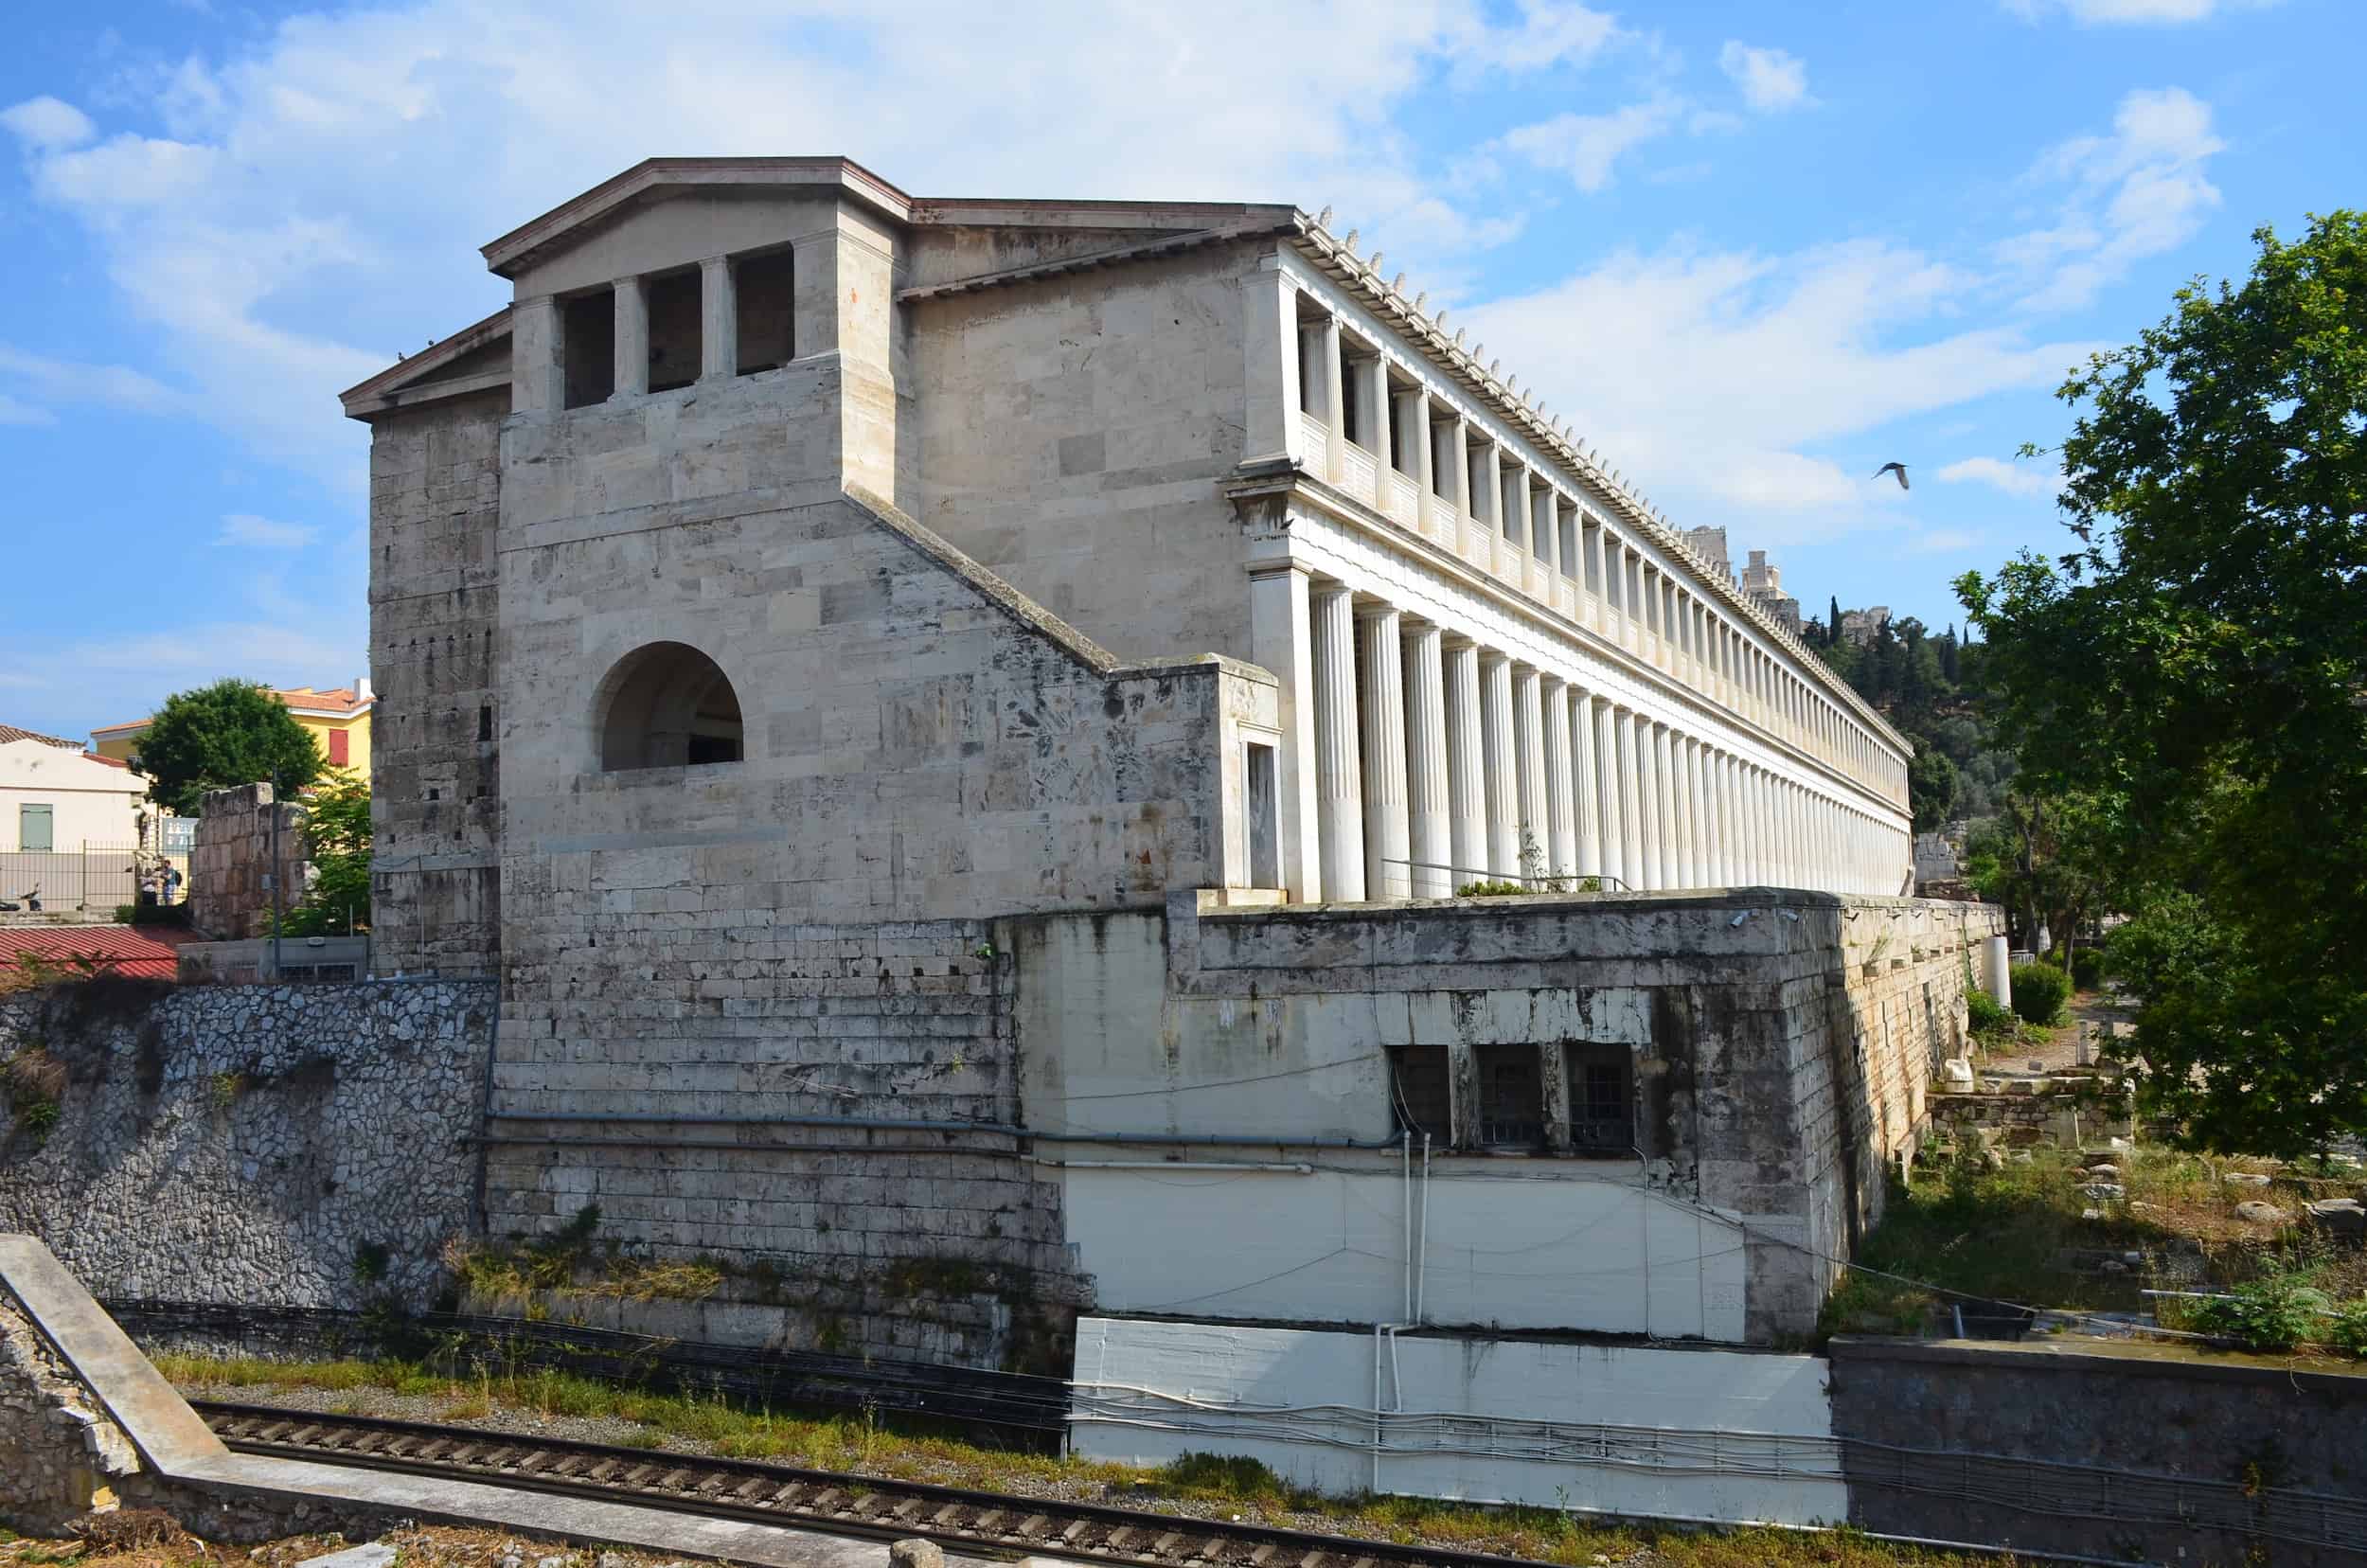 North side of the Stoa of Attalos at the Ancient Agora of Athens